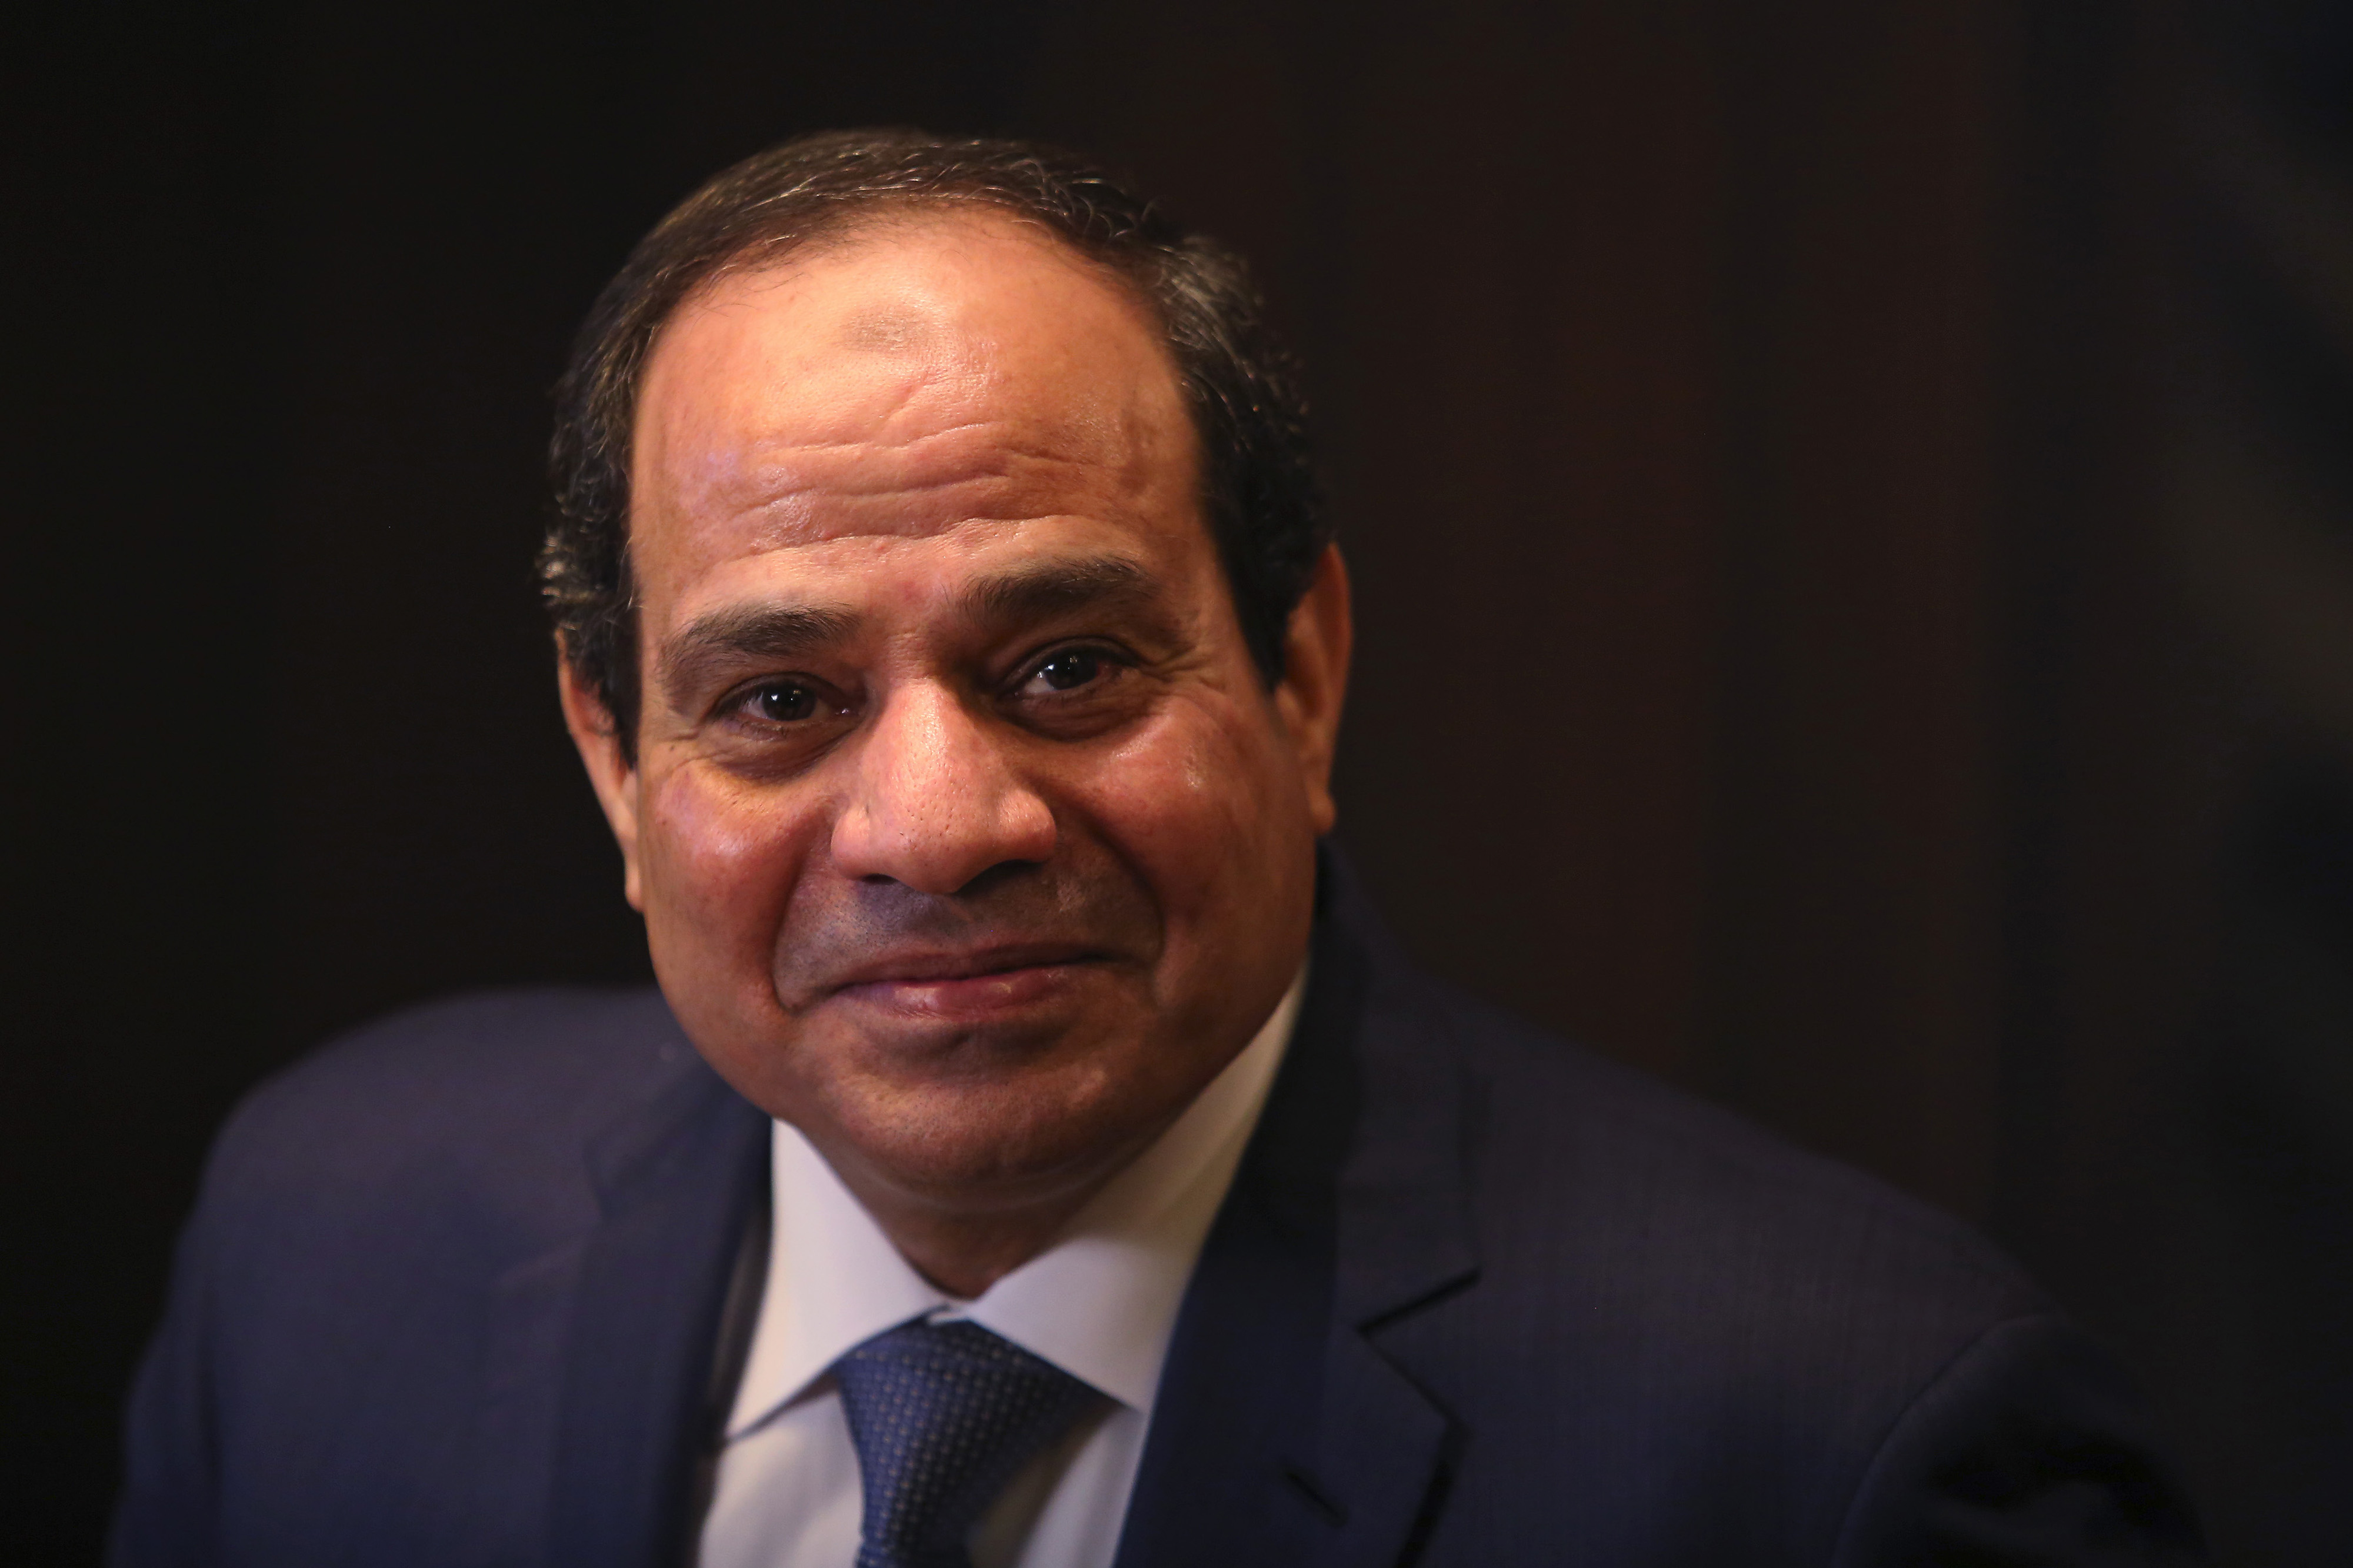 Abdel-Fattah El-Sisi, Egypt's president, pauses during a Bloomberg Television interview on day two of the World Economic Forum (WEF) in Davos, Switzerland, on Jan. 22, 2015. (Bloomberg/Getty Images)